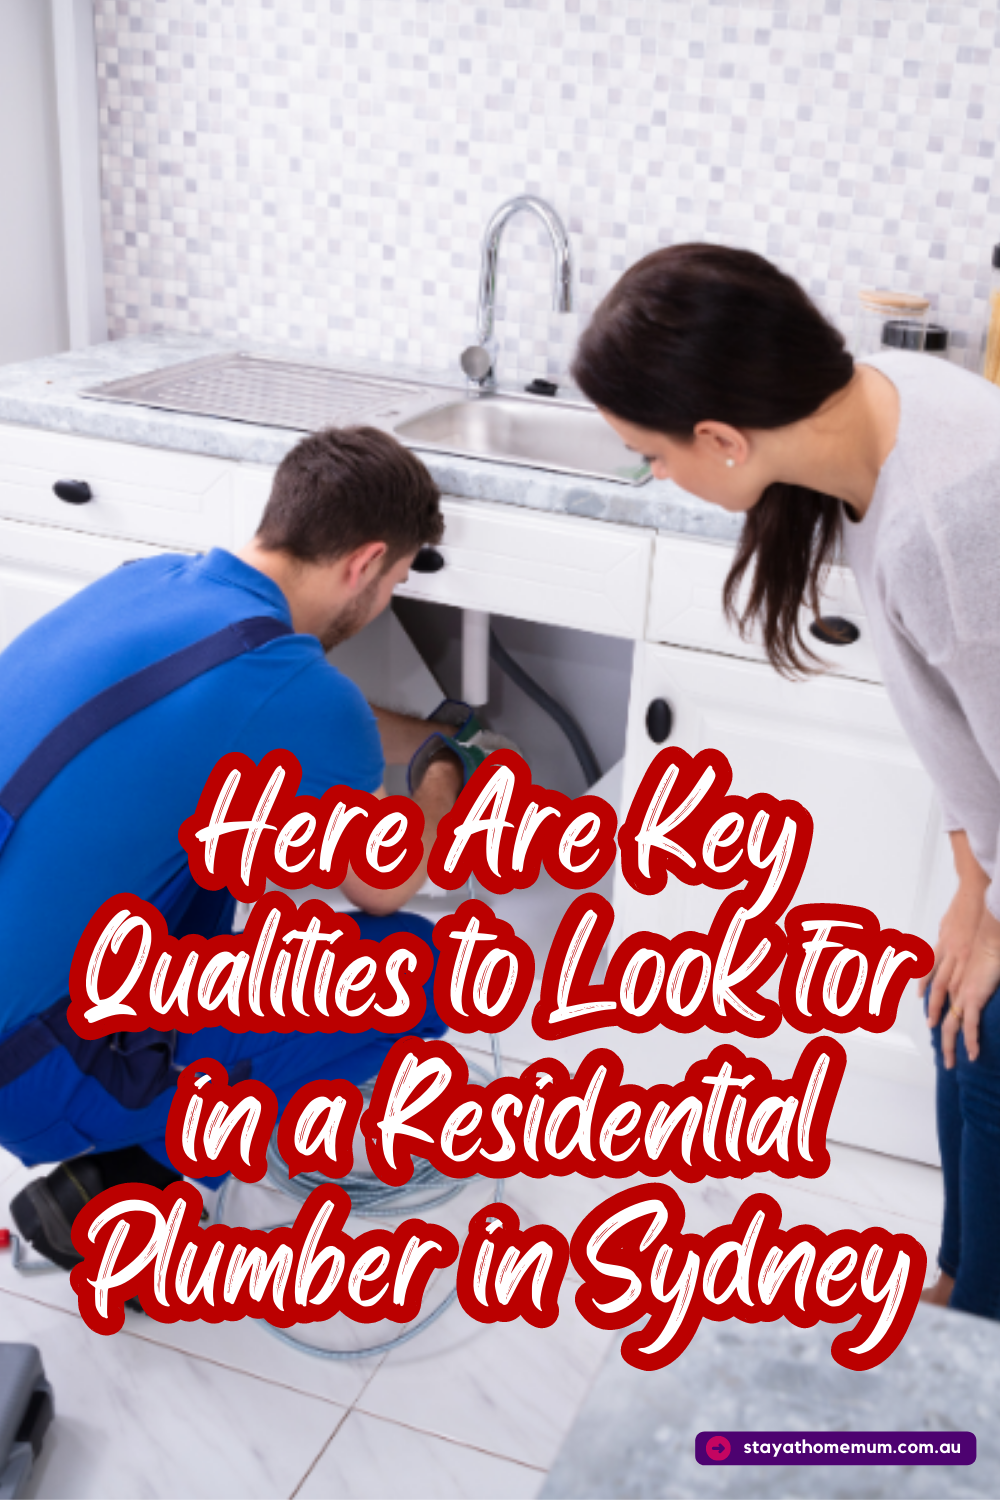 Here Are Key Qualities to Look for in a Residential Plumber in Sydney Pinnable